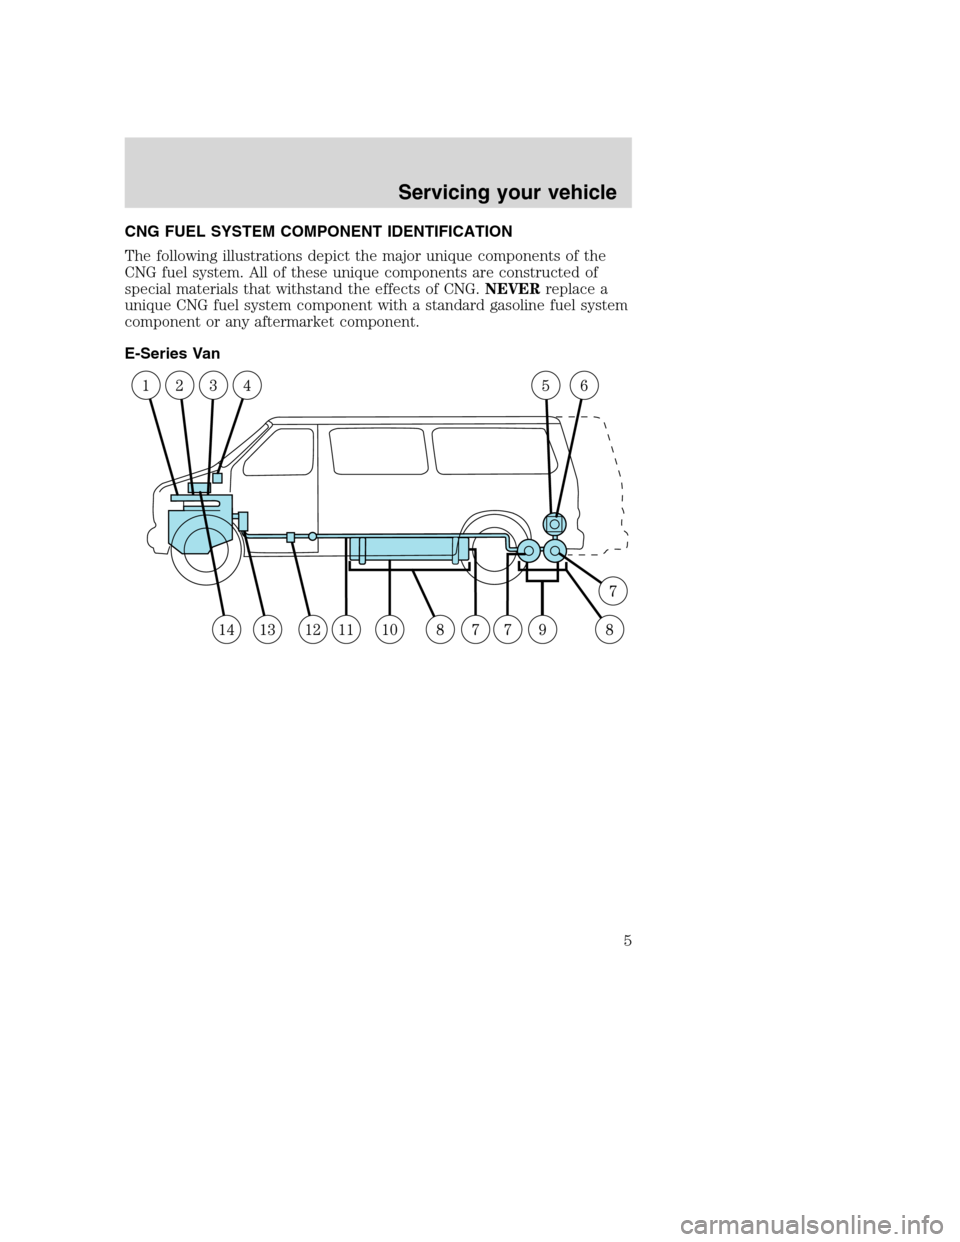 FORD E SERIES 2004 4.G Natural Gas Vehicle Supplement Manual CNG FUEL SYSTEM COMPONENT IDENTIFICATION
The following illustrations depict the major unique components of the
CNG fuel system. All of these unique components are constructed of
special materials that